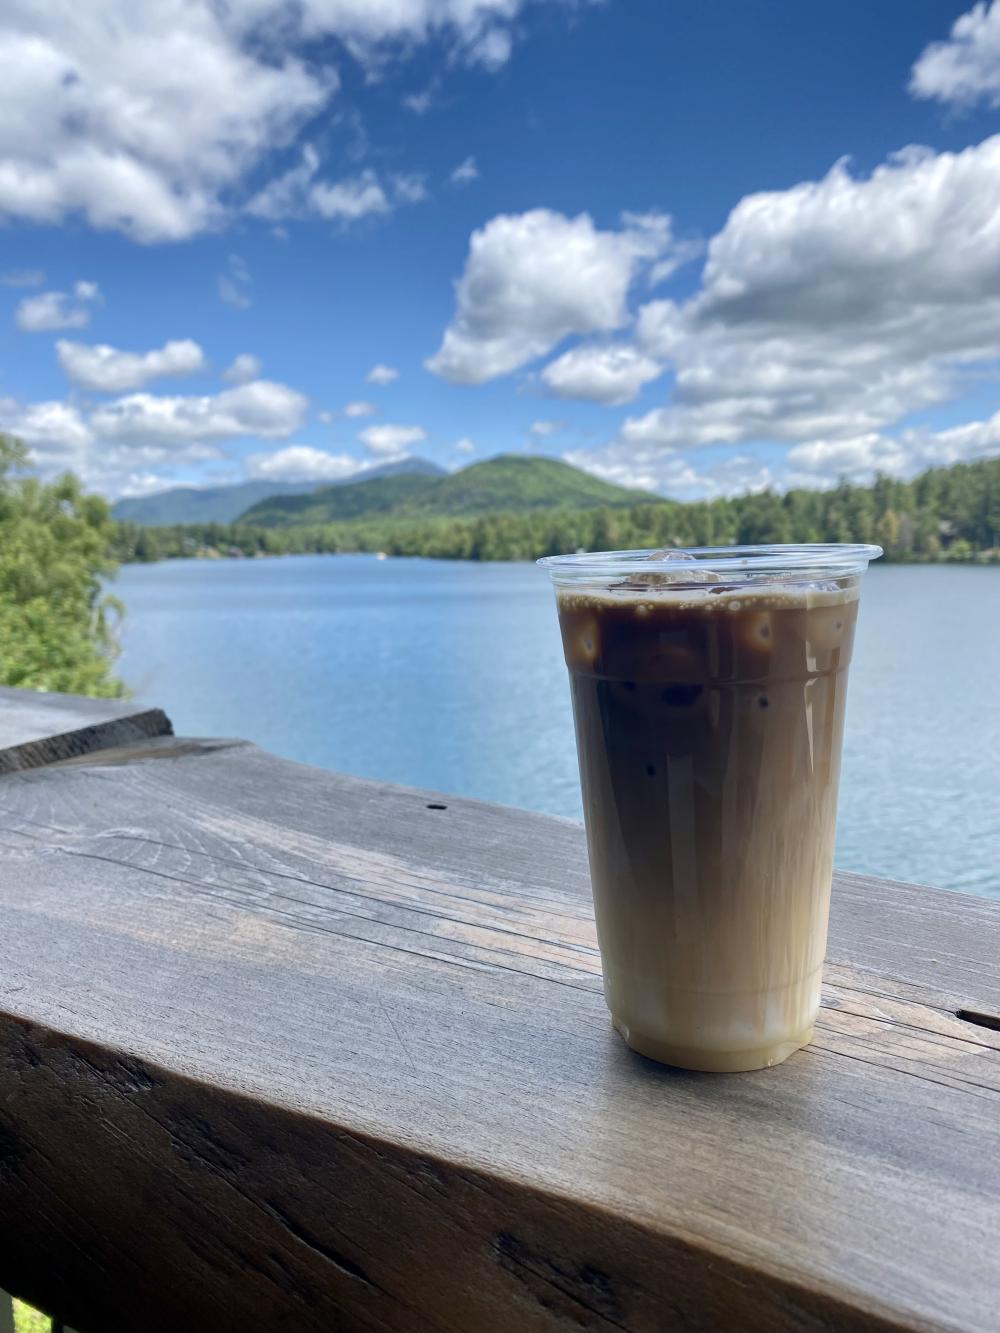 A cold coffee sits on a railing overlooking a sunny lake and mountains.